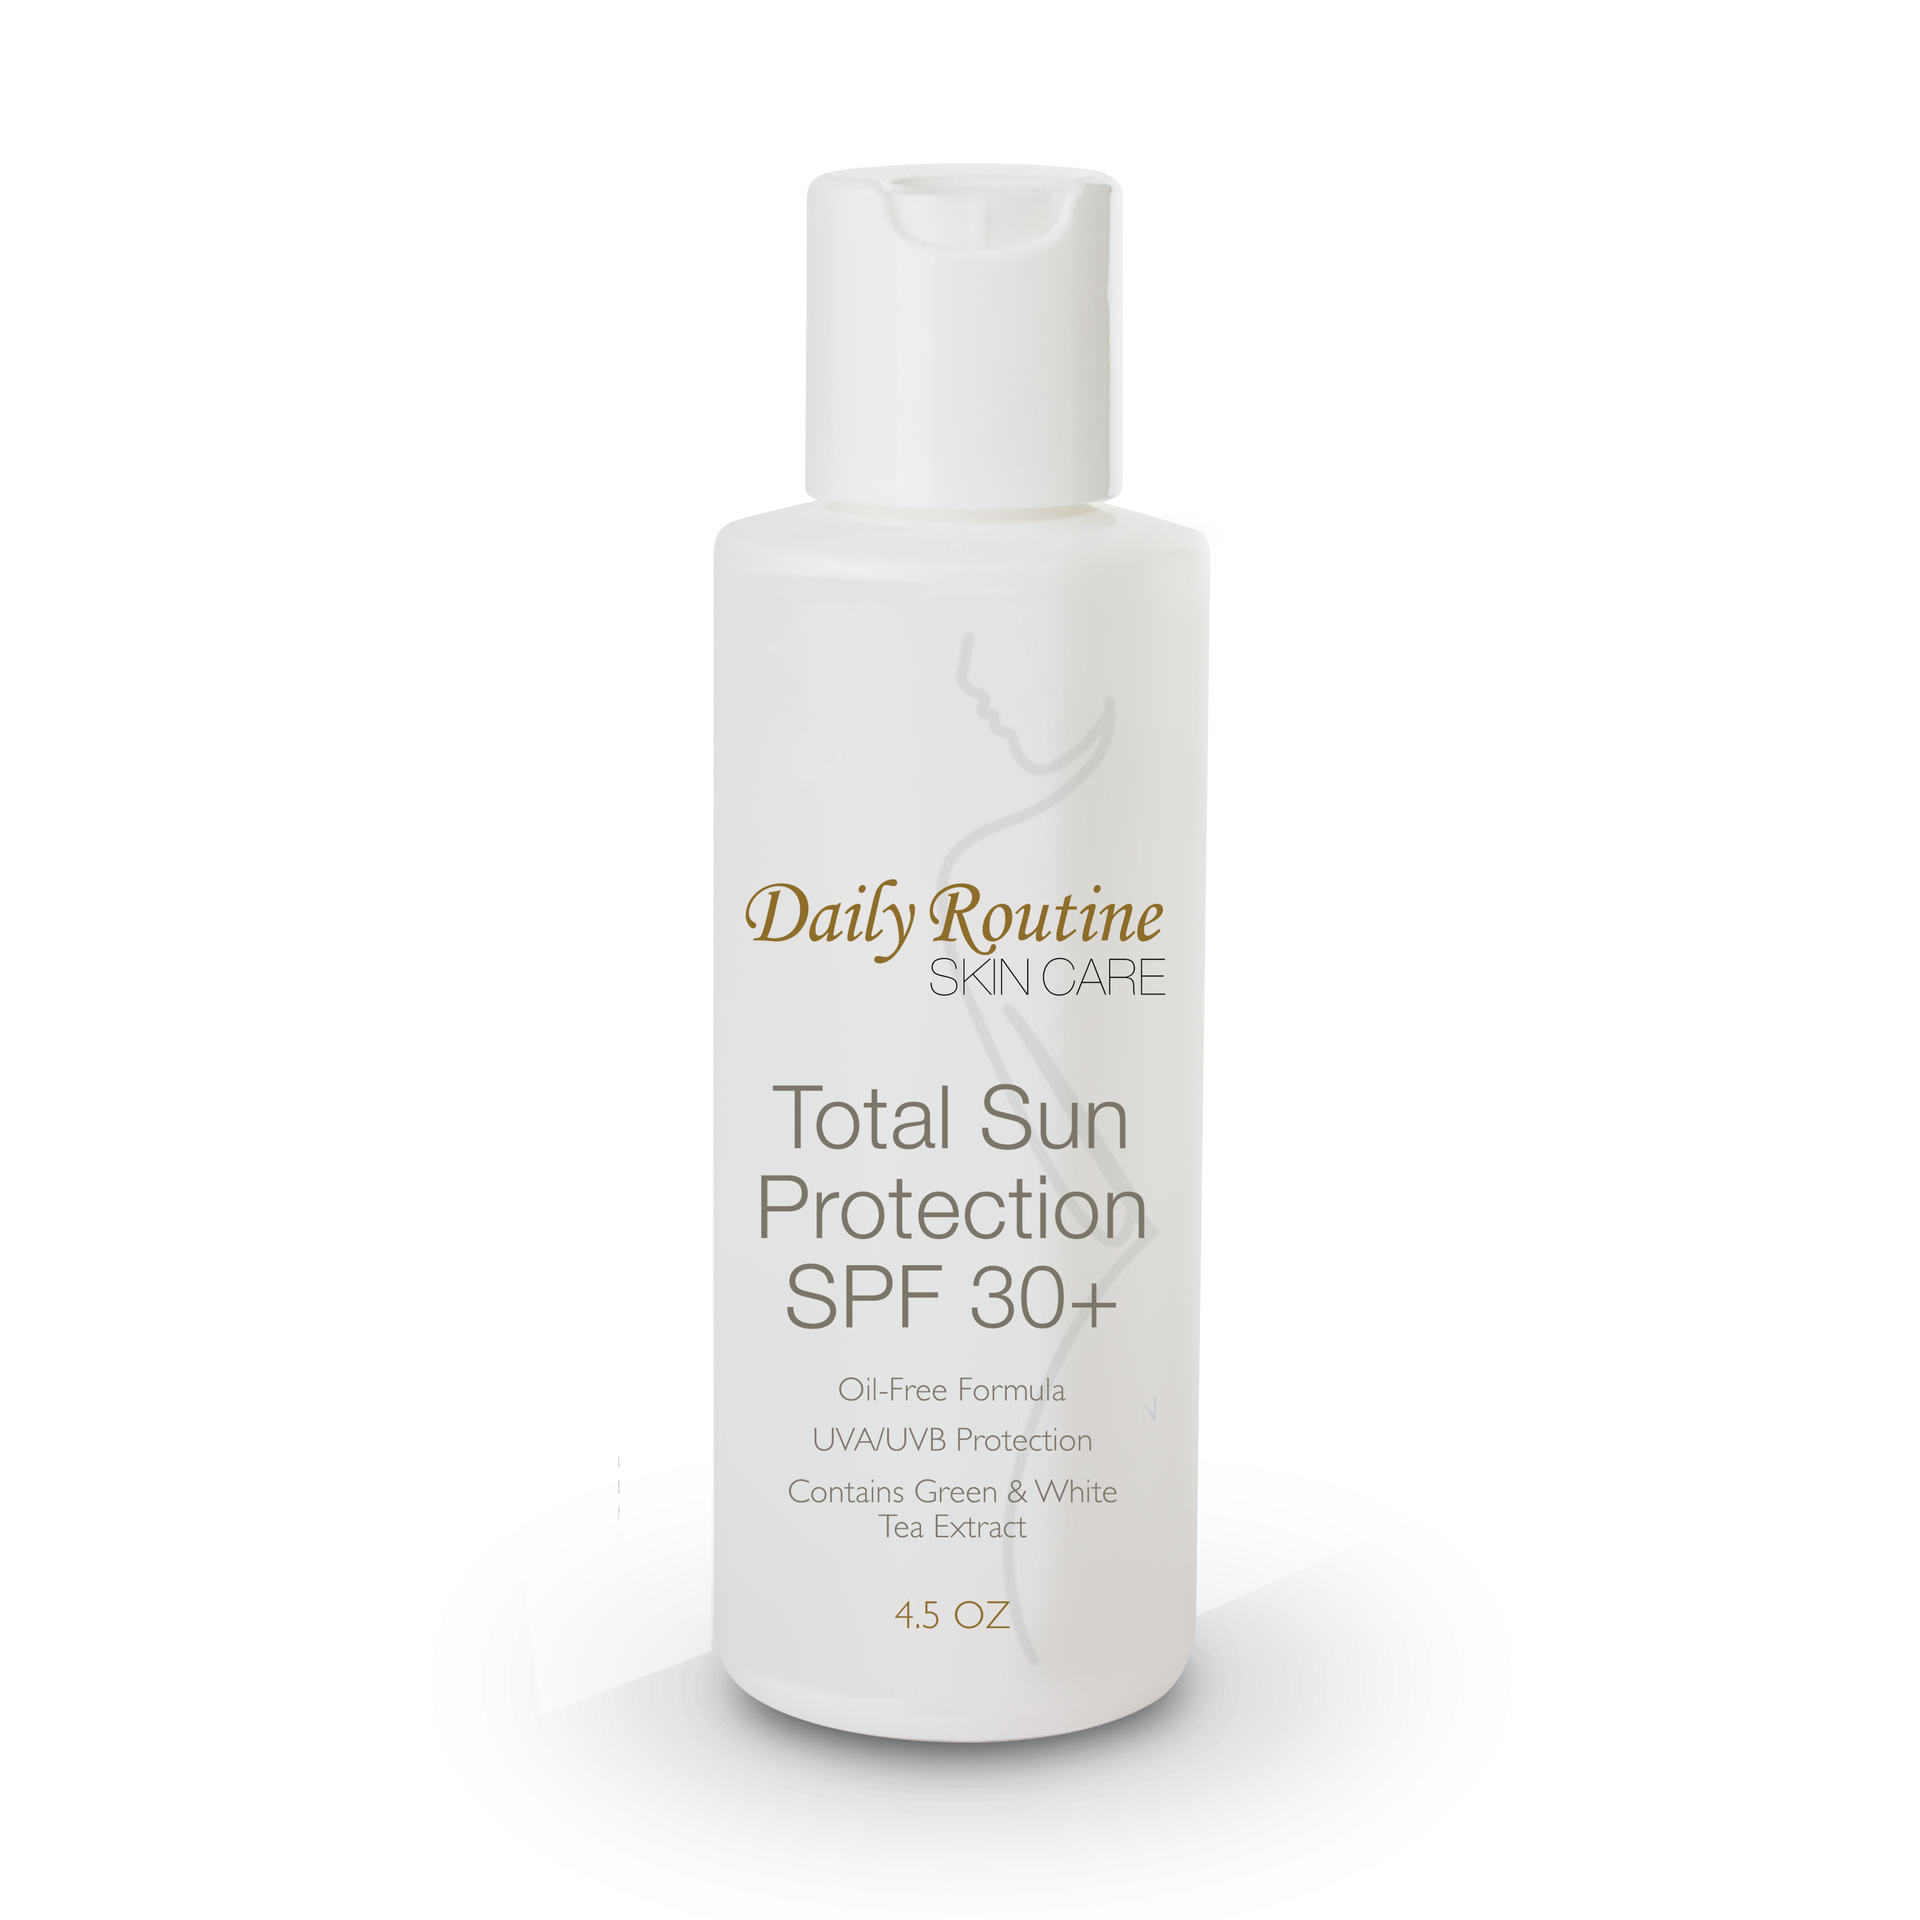 Total Sun Protection SPF 30+ by Daily Routine Skin Care